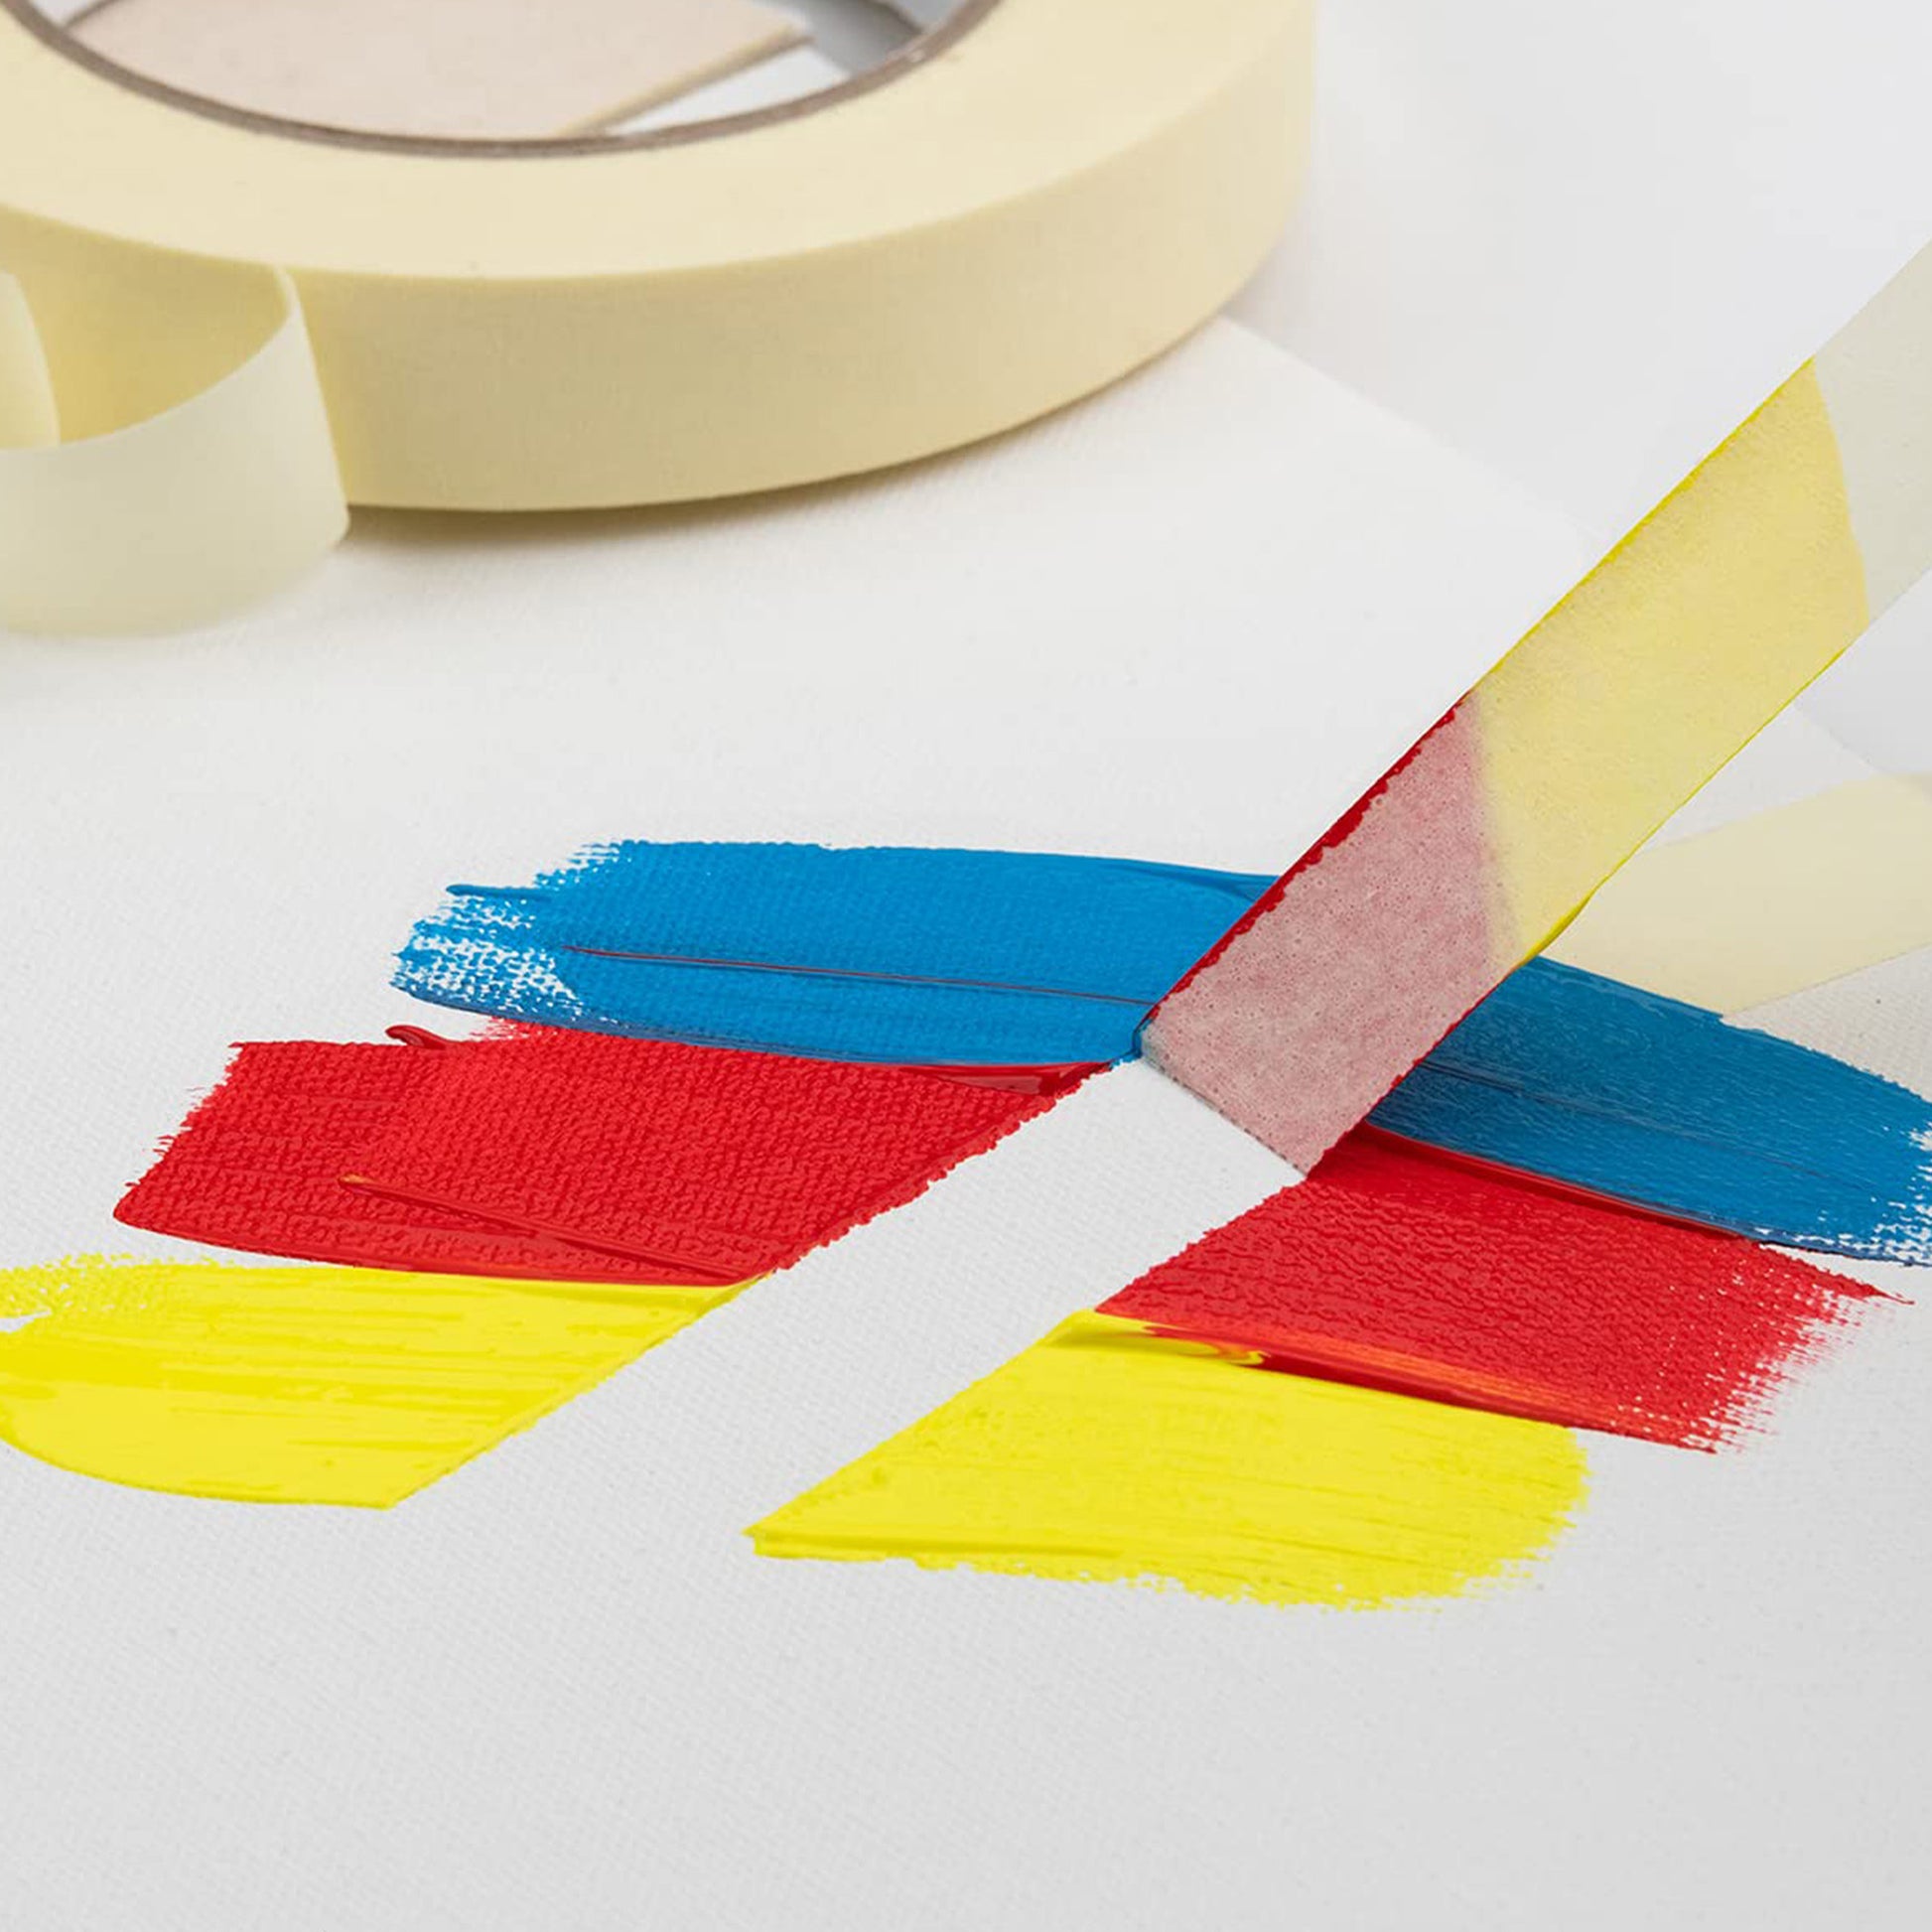 Art Alternative masking tape in action masking a canvas with yellow red and blue paint